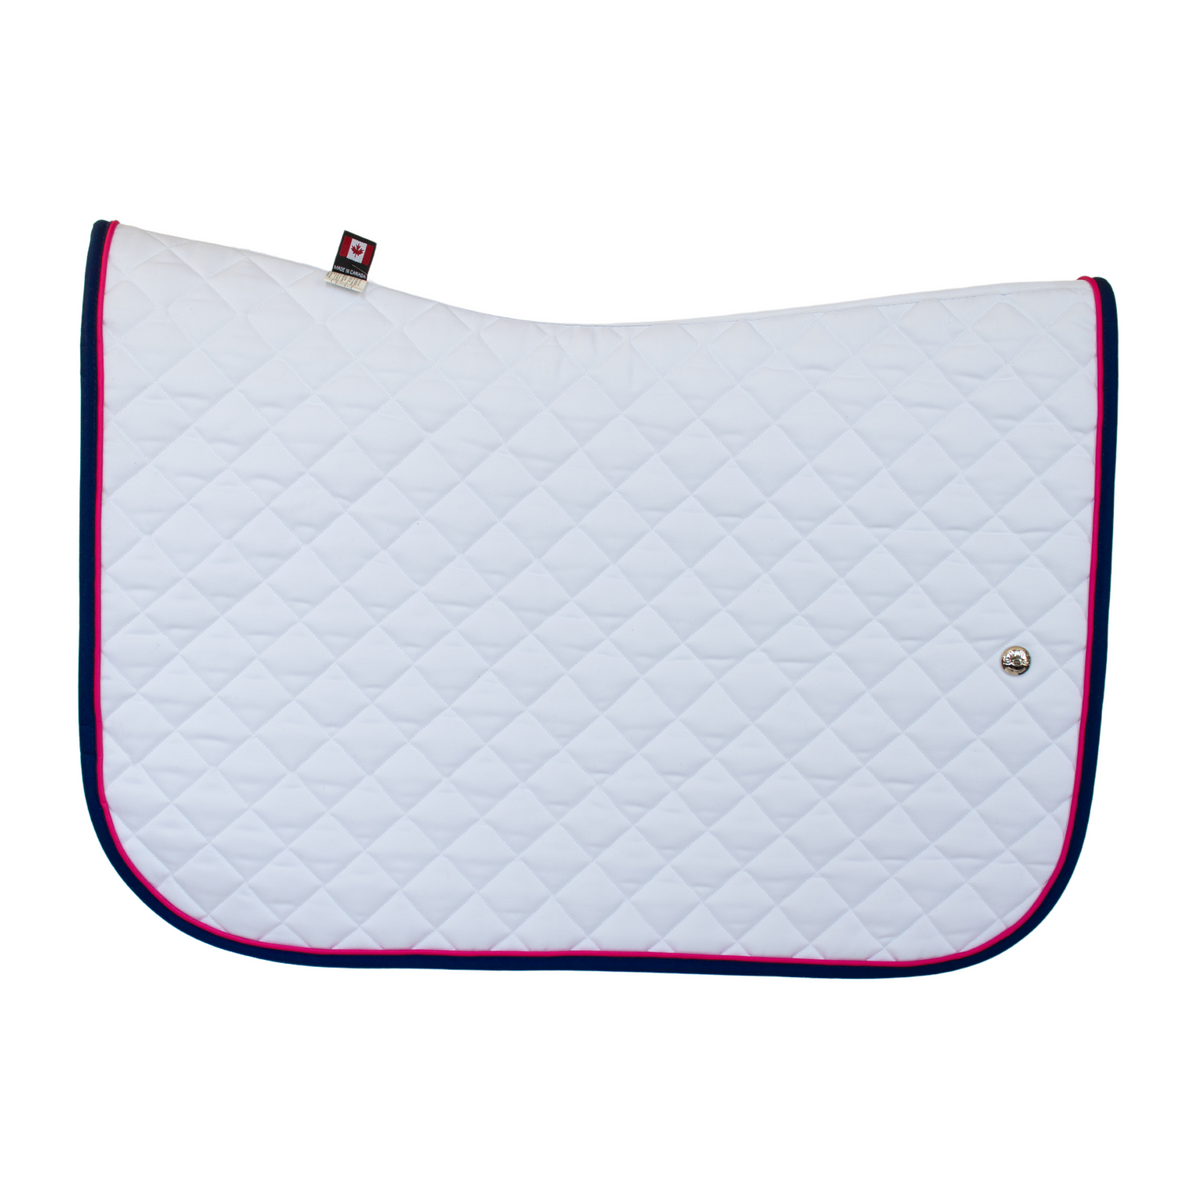 Jumper Baby Pad White/Navy/Hot Pink